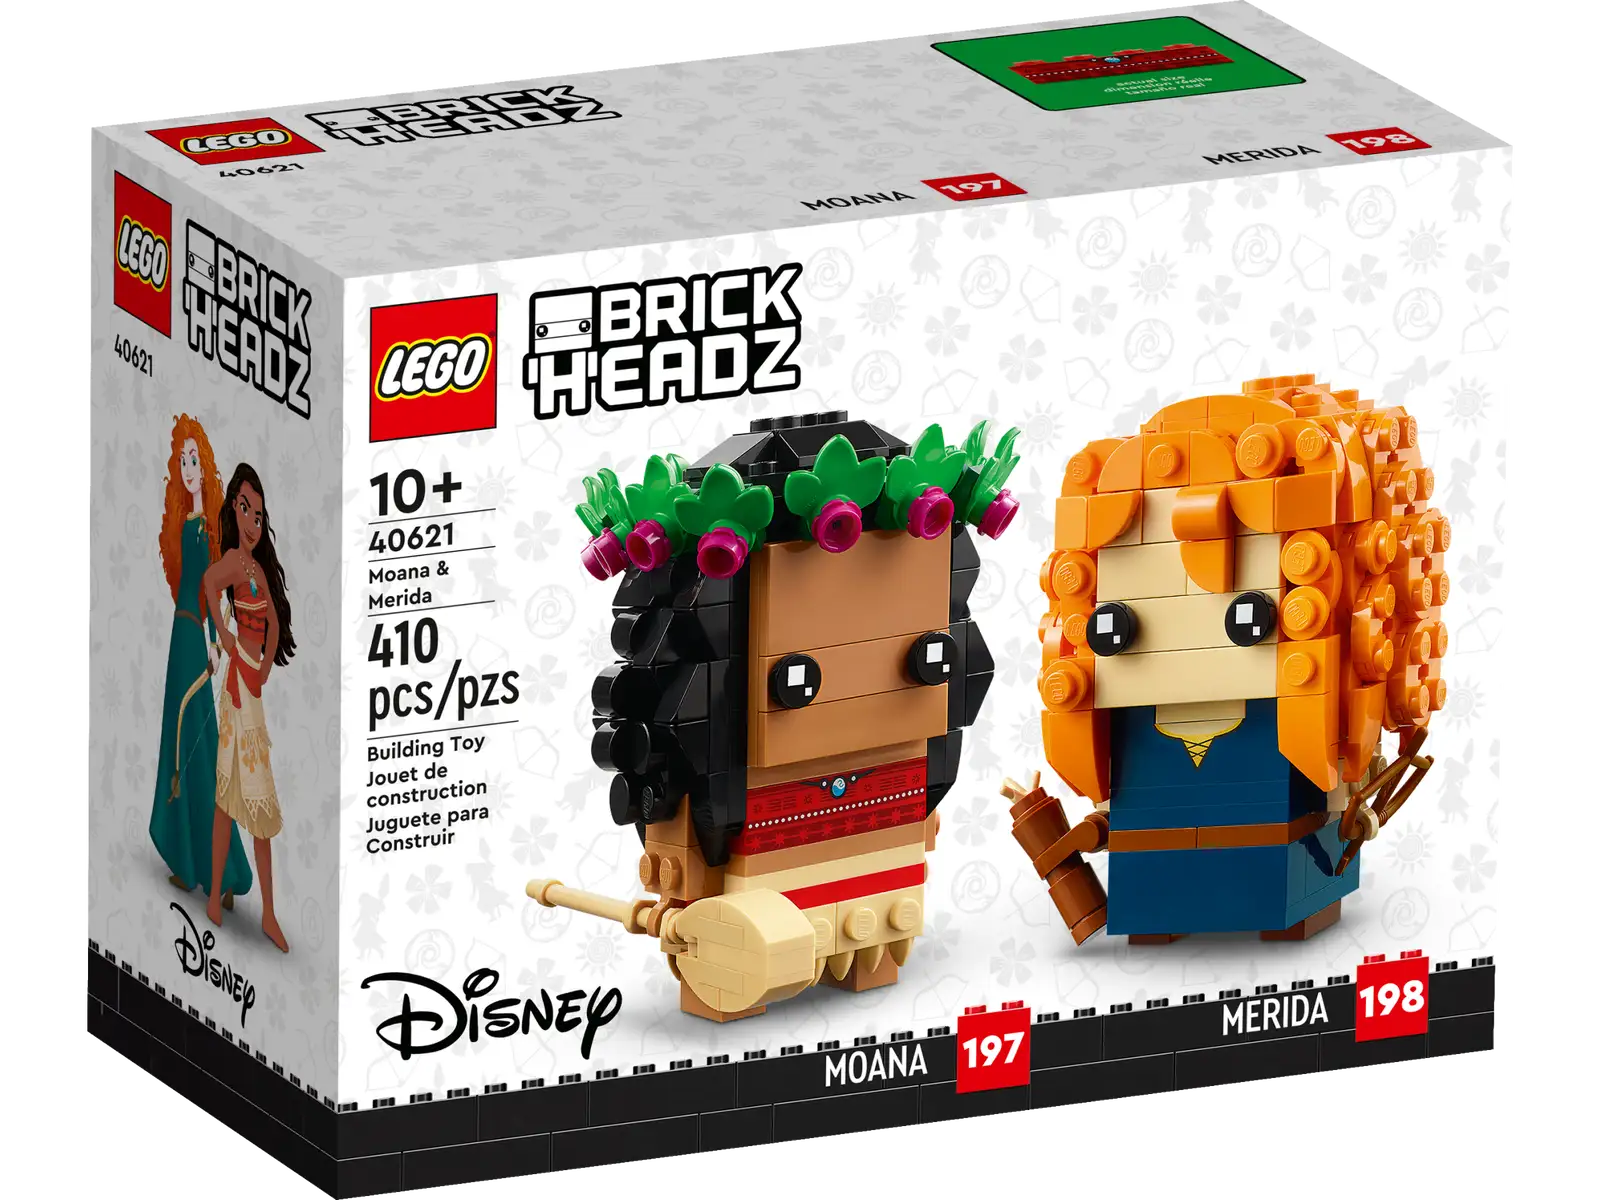 Inspire kids aged 10 and up with this BrickHeadz™ set featuring Disney’s Moana and Disney•Pixar’s Merida (40621) buildable LEGO® figures. Movie fans can build the detailed models, then set them on individual baseplates and display them anywhere at home or in the office. The set consists of 410 pieces to create the 2 LEGO figures. Moana’s skirt is decorated like in the movie. The set makes a fun birthday or holiday gift and collectible display piece for kids or fans of the movies. Bold, brick-built characters – Buildable LEGO® BrickHeadz™ figures of Disney’s Moana and Disney Pixar’s Merida (40621). A fun gift for a movie fan or an older kid who loves meaningful role models Adventurous display – This collectible 410-piece LEGO® BrickHeadz™ building toy kit for kids aged 10 and up comes with step-by-step building instructions and includes baseplates for display Measurements – Moana and Merida both stand over 3 in. (8 cm) high